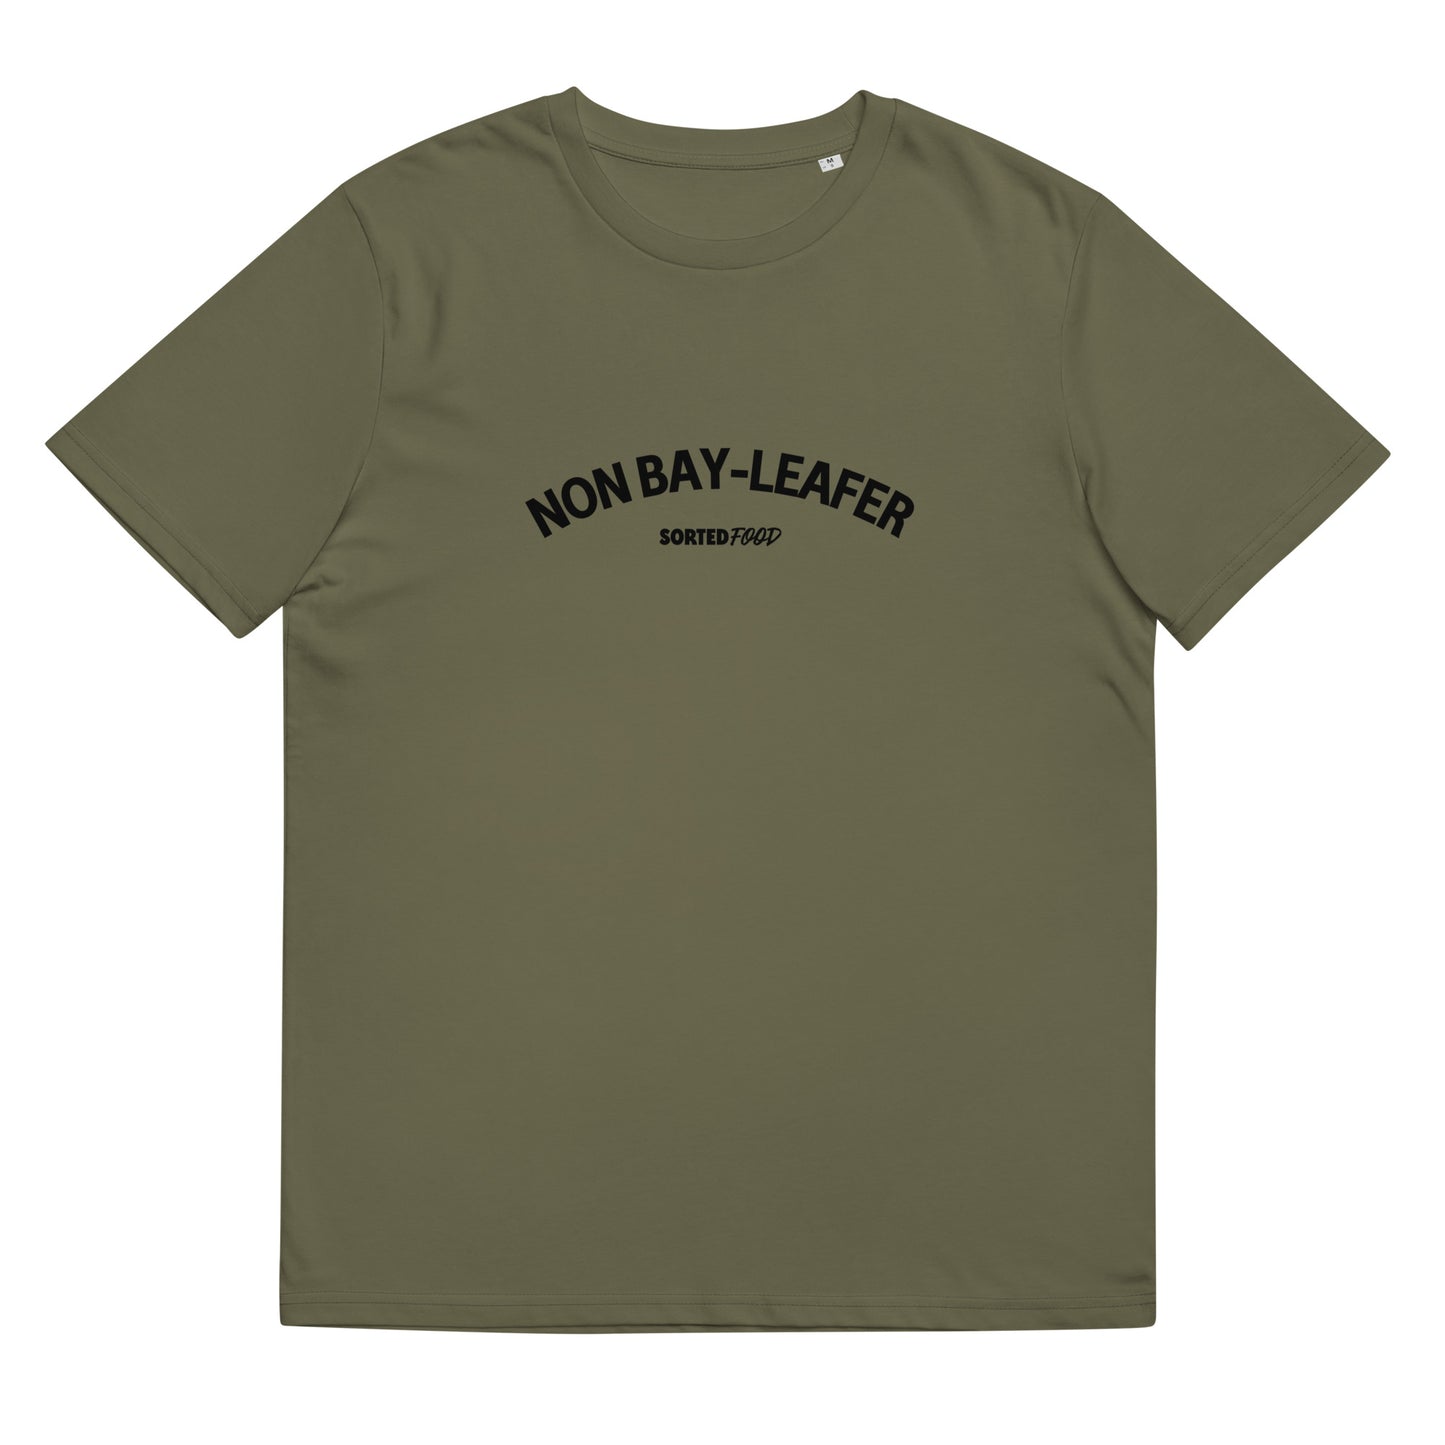 Non Bay-Leafer Tee